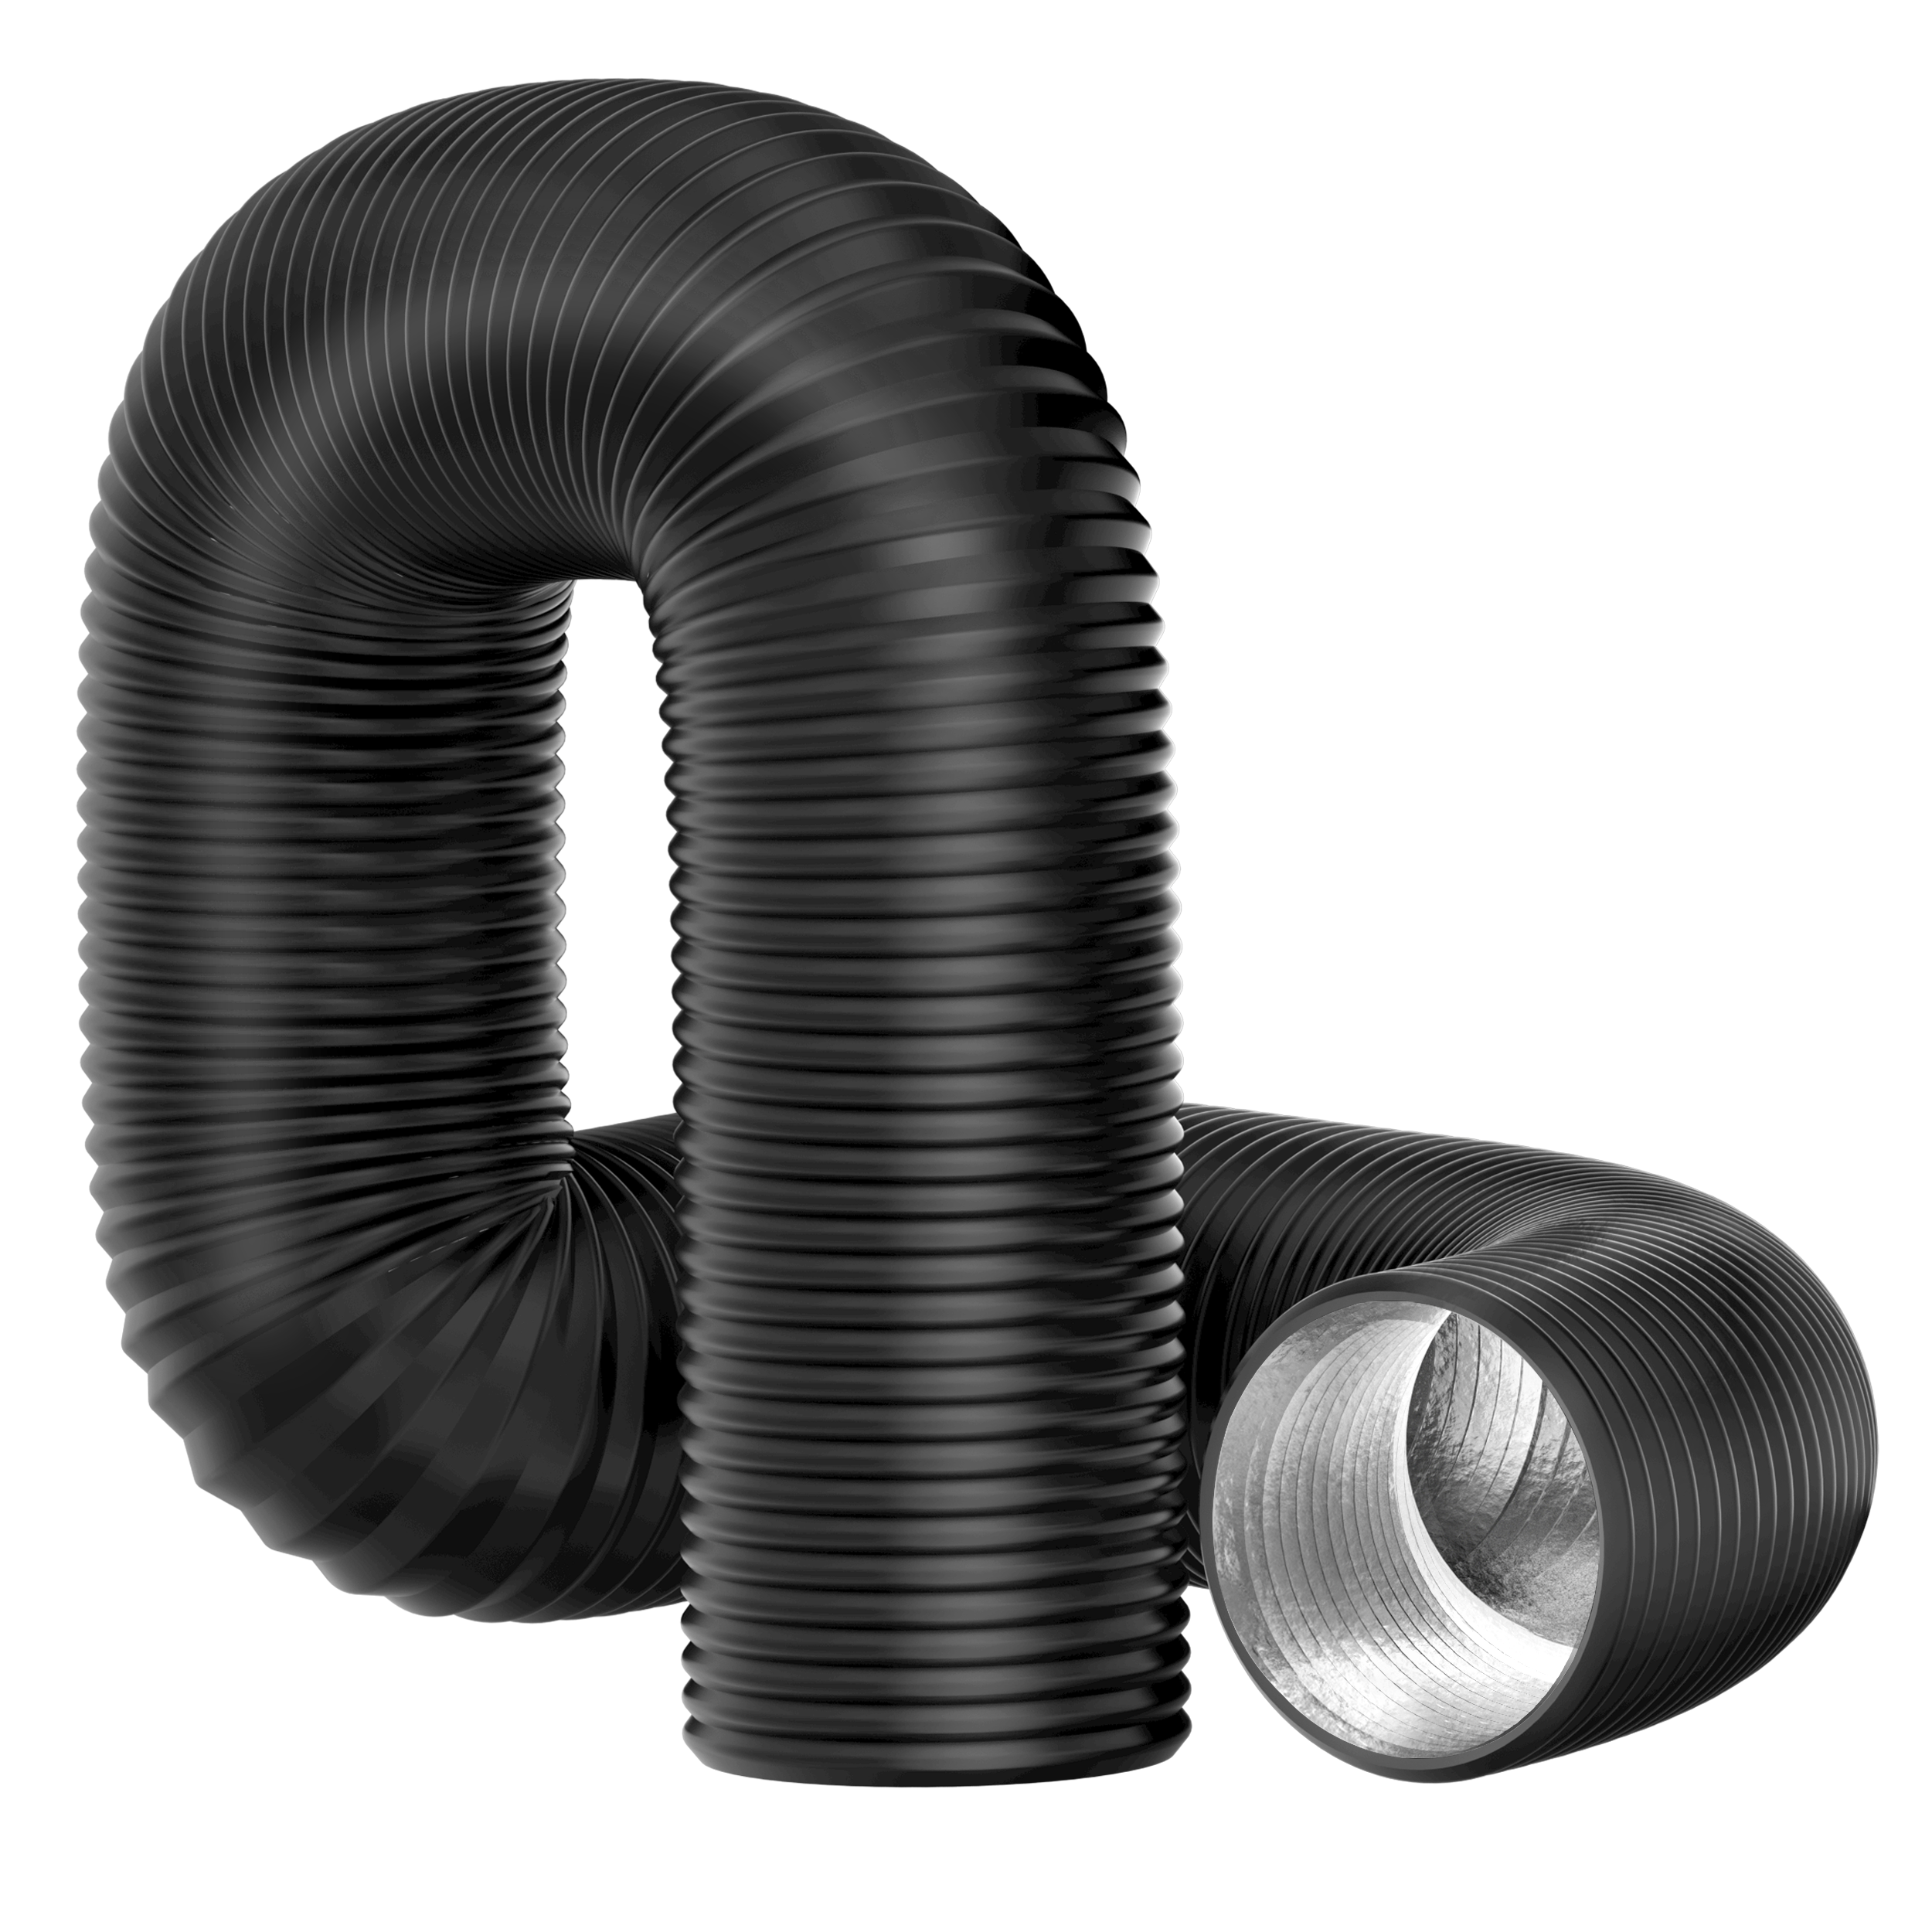 X AUTOHAUX 42mm Inner Diameter 990mm Length Car Heater Ducting Pipe Warm  Air Ducting Hose Vent Black